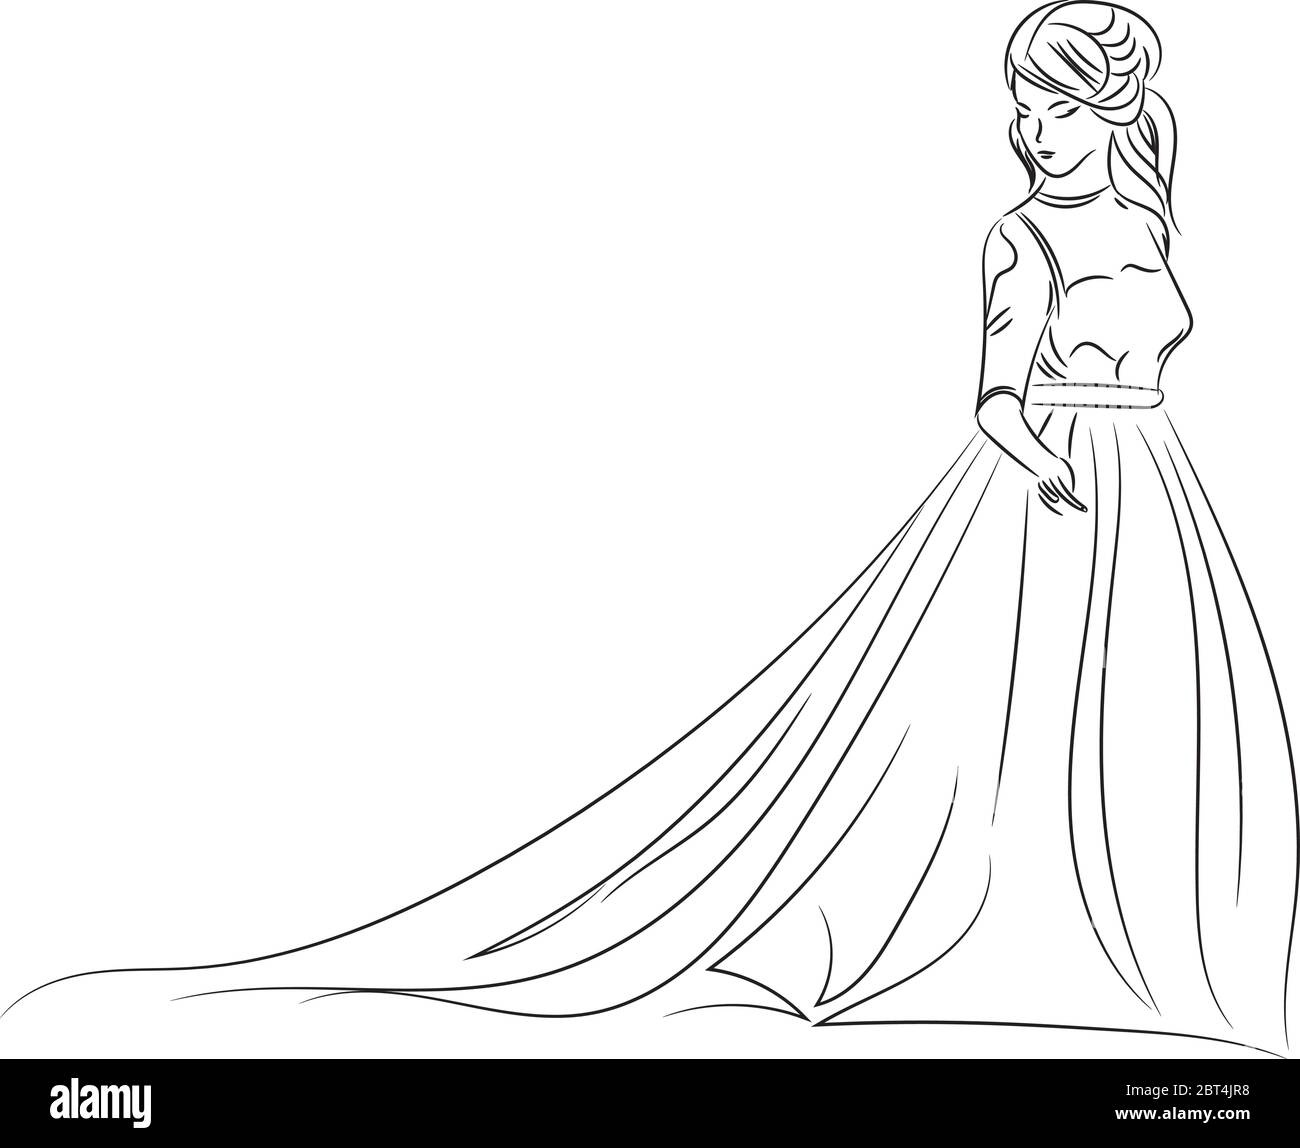 Sketch of an elegant bride in white wedding dress. Abstract hand drawn outline wedding illustration Stock Vector